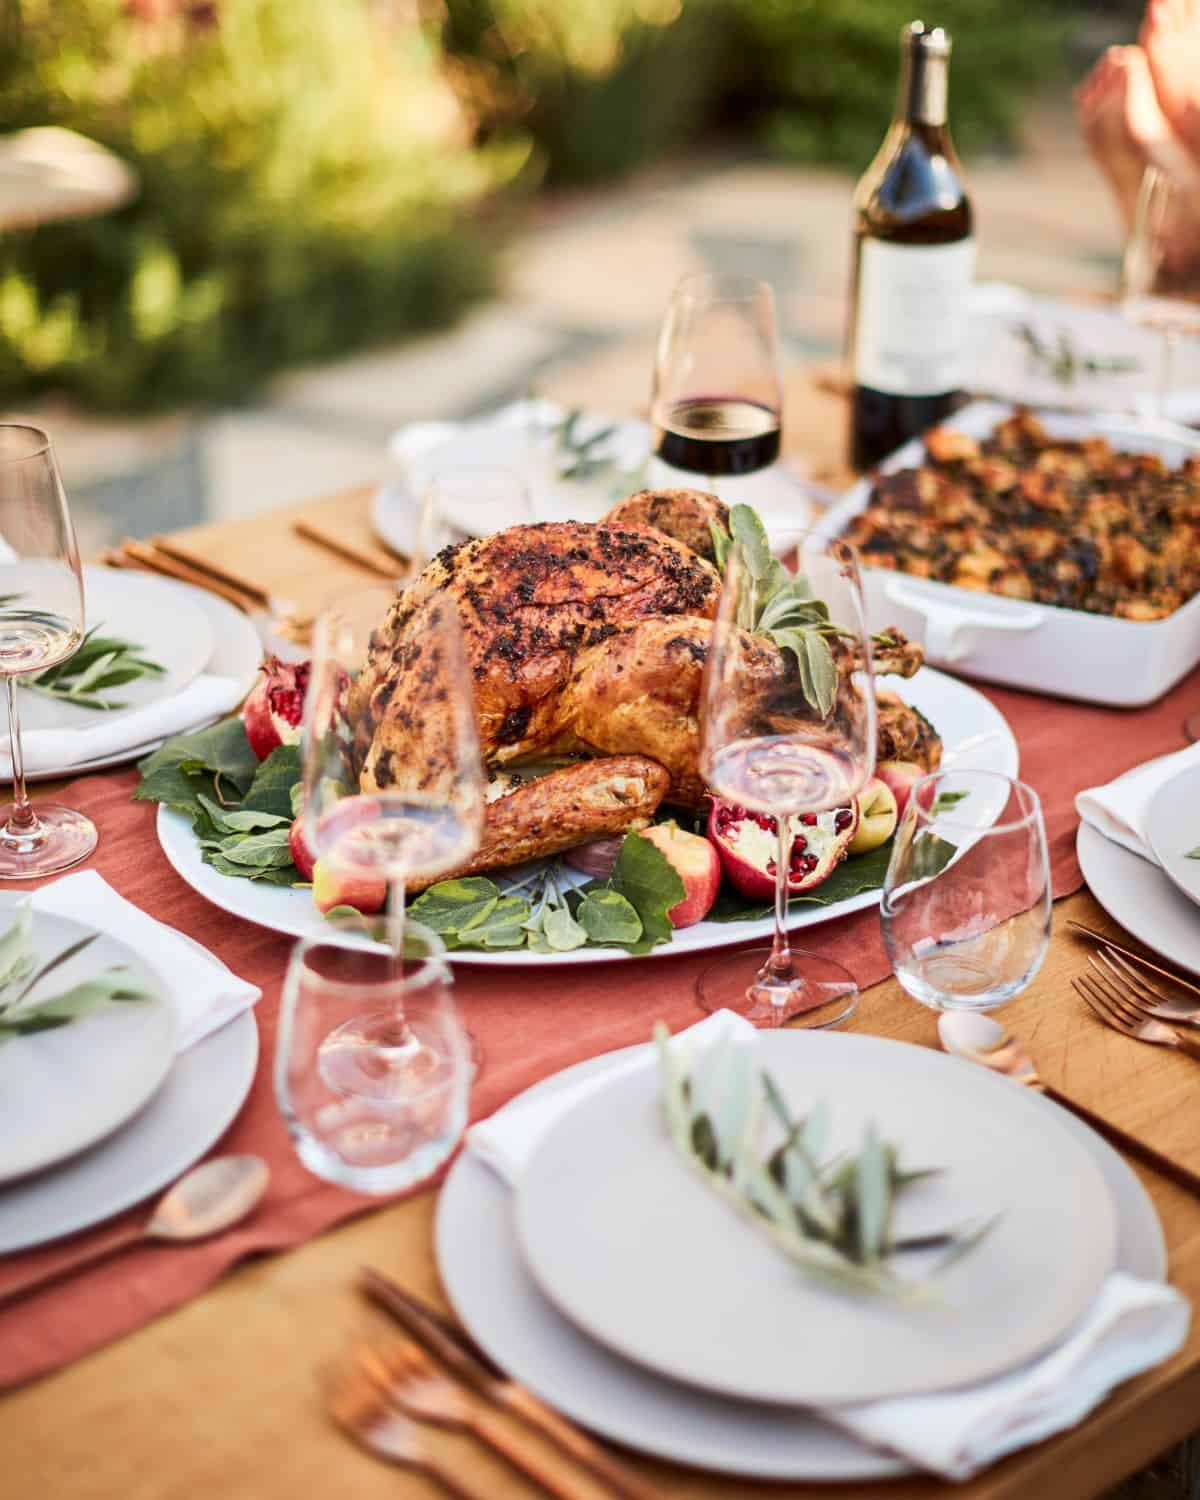 Dinner table with a whole roasted turkey plate in the center, wine glasses and plates, a baking dish with stuffing in the back and a bottle of wine.